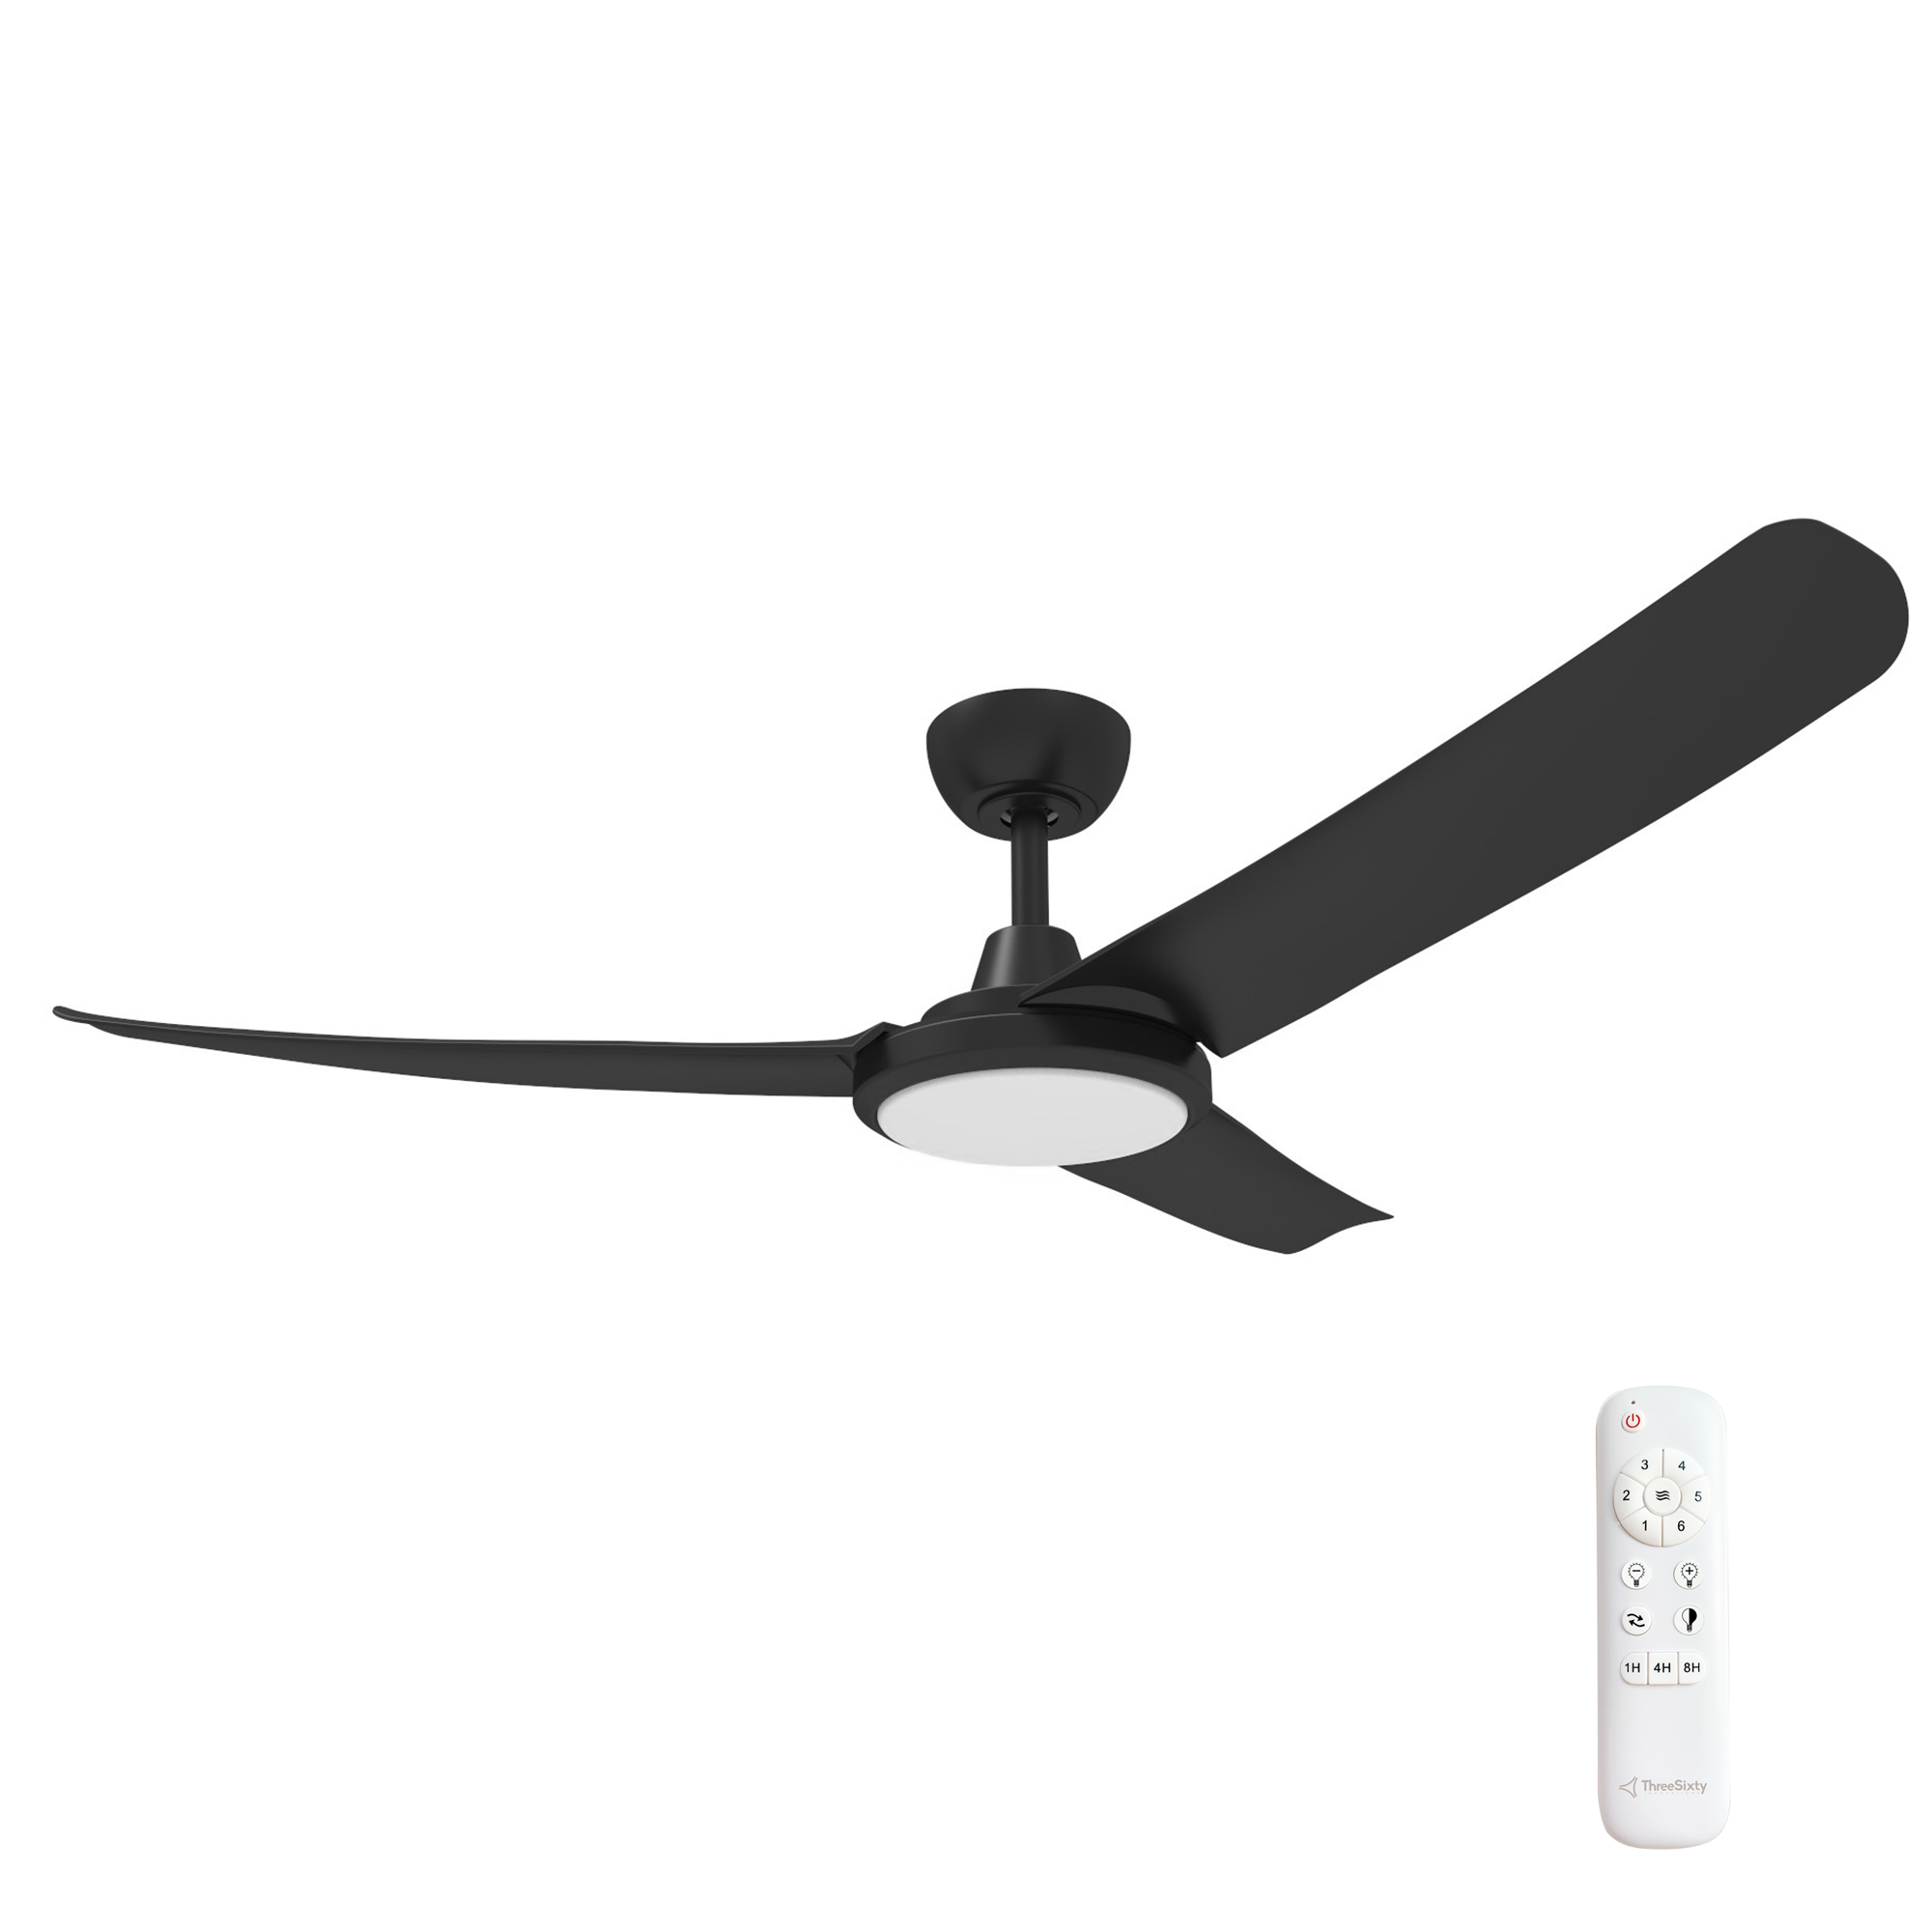 52" FlatJET DC Ceiling Fan in Black with 24W Dimmable CCT LED Light